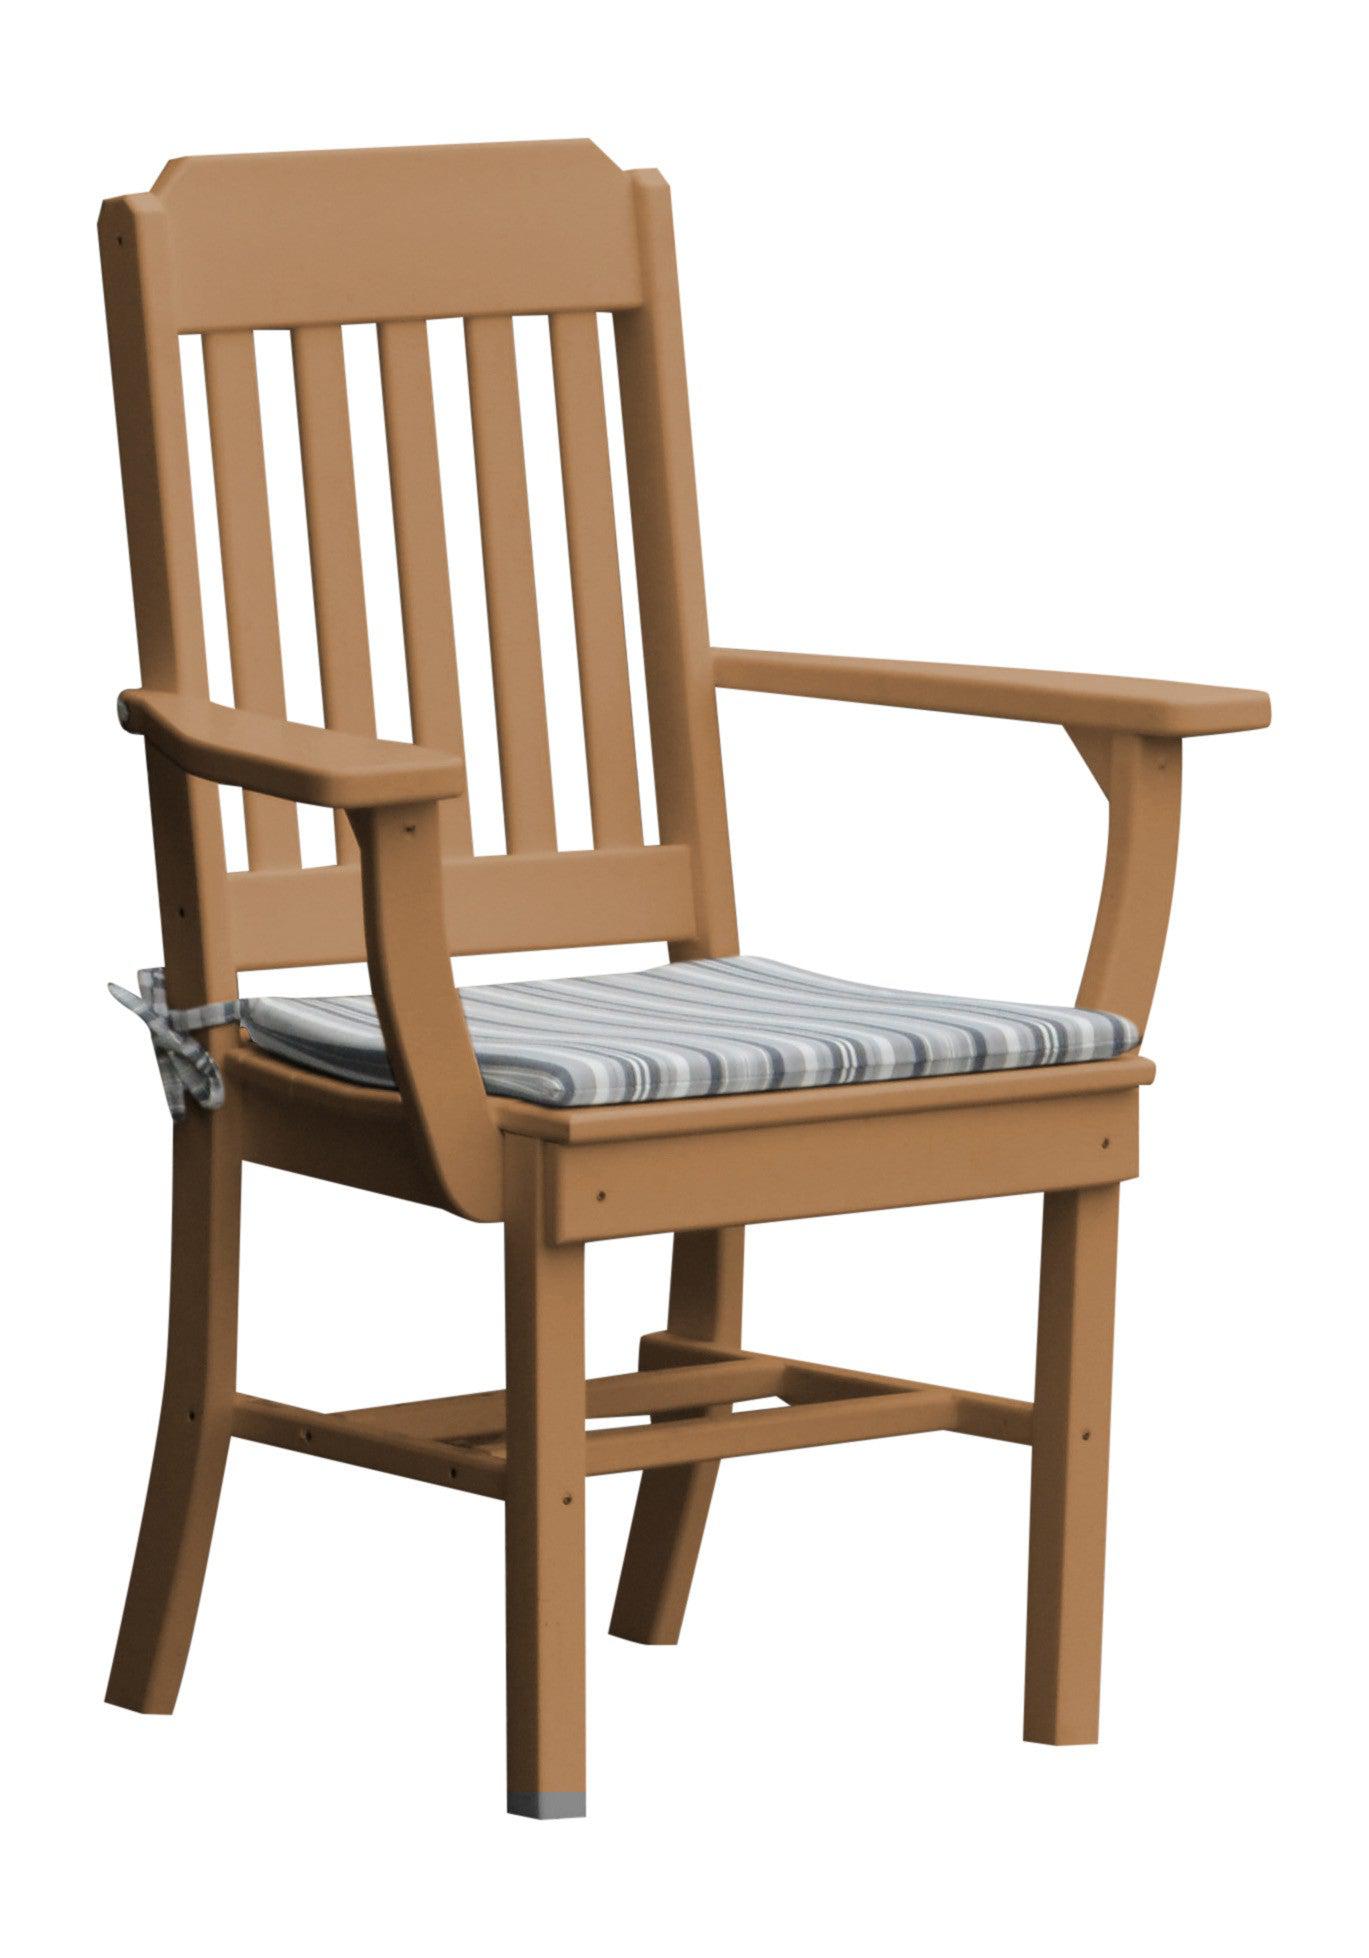 A&L Furniture Company Recycled Plastic Traditional Dining Chair w/ Arms - Cedar